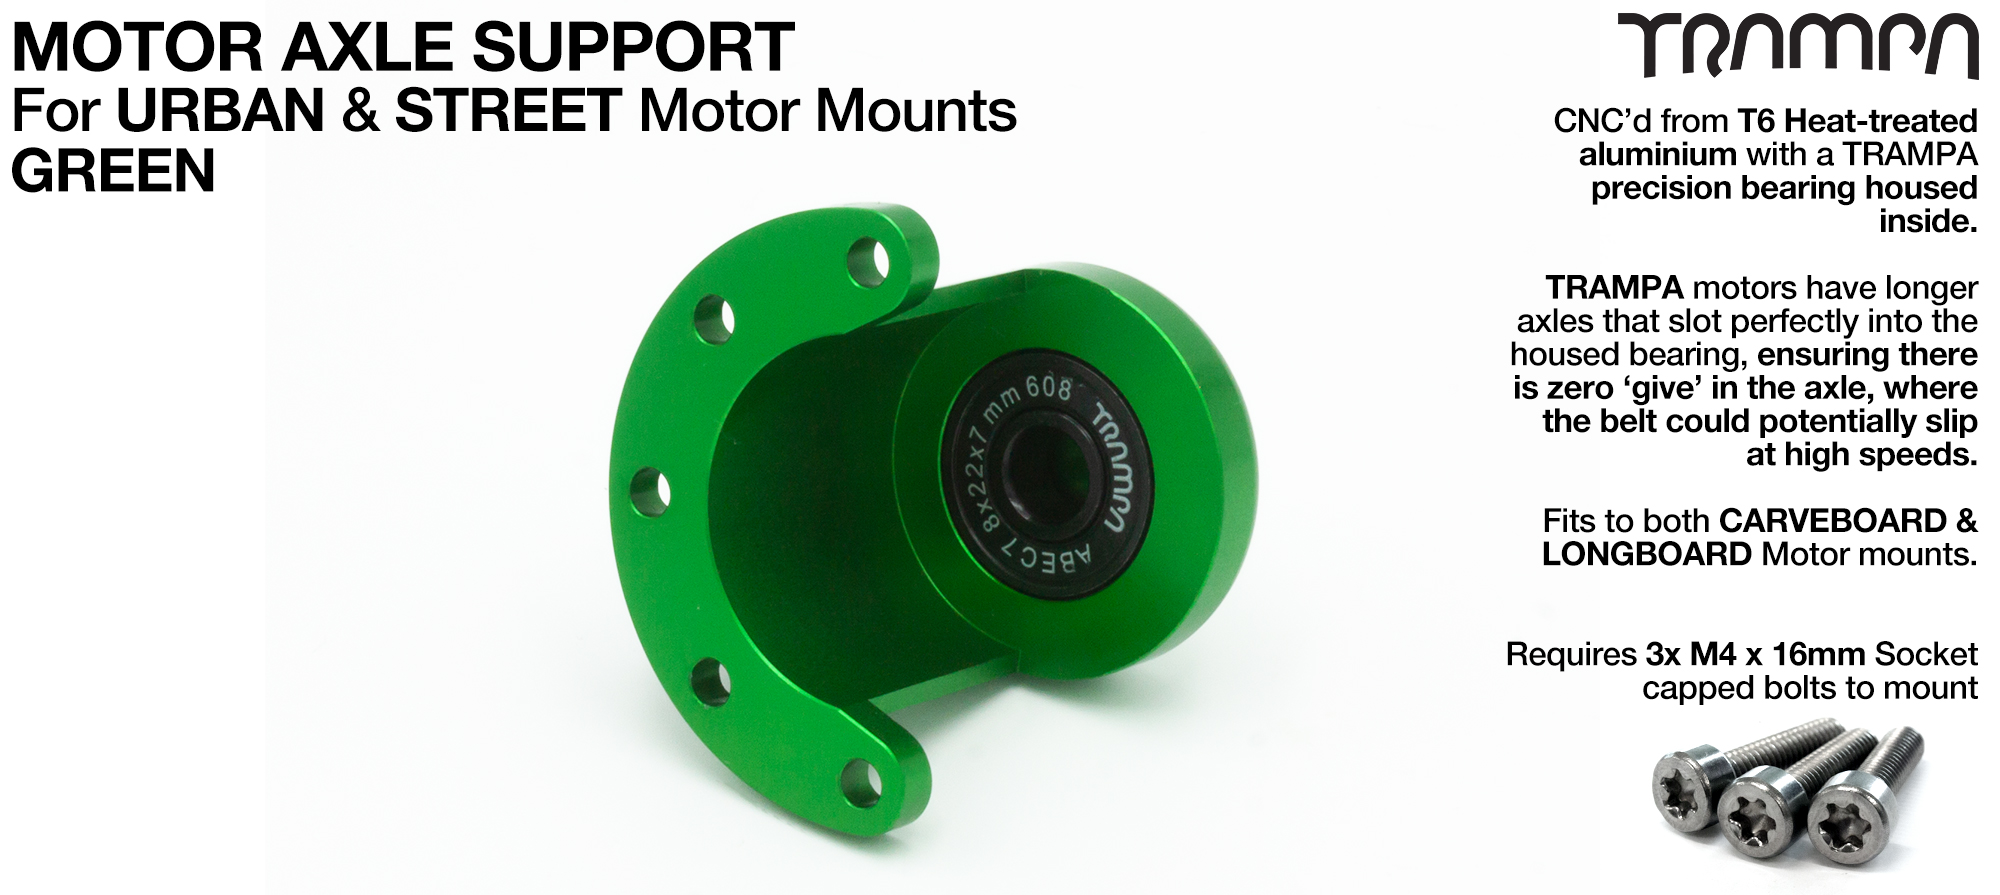 Motor Axle Support Housing with TRAMPA R608 8x22x7mm Bearing, C-Clip & Stainless Steel fixing Bolts for Mini Spring Truck MKII CARVE Motor Mounts UNIVERSAL - GREEN